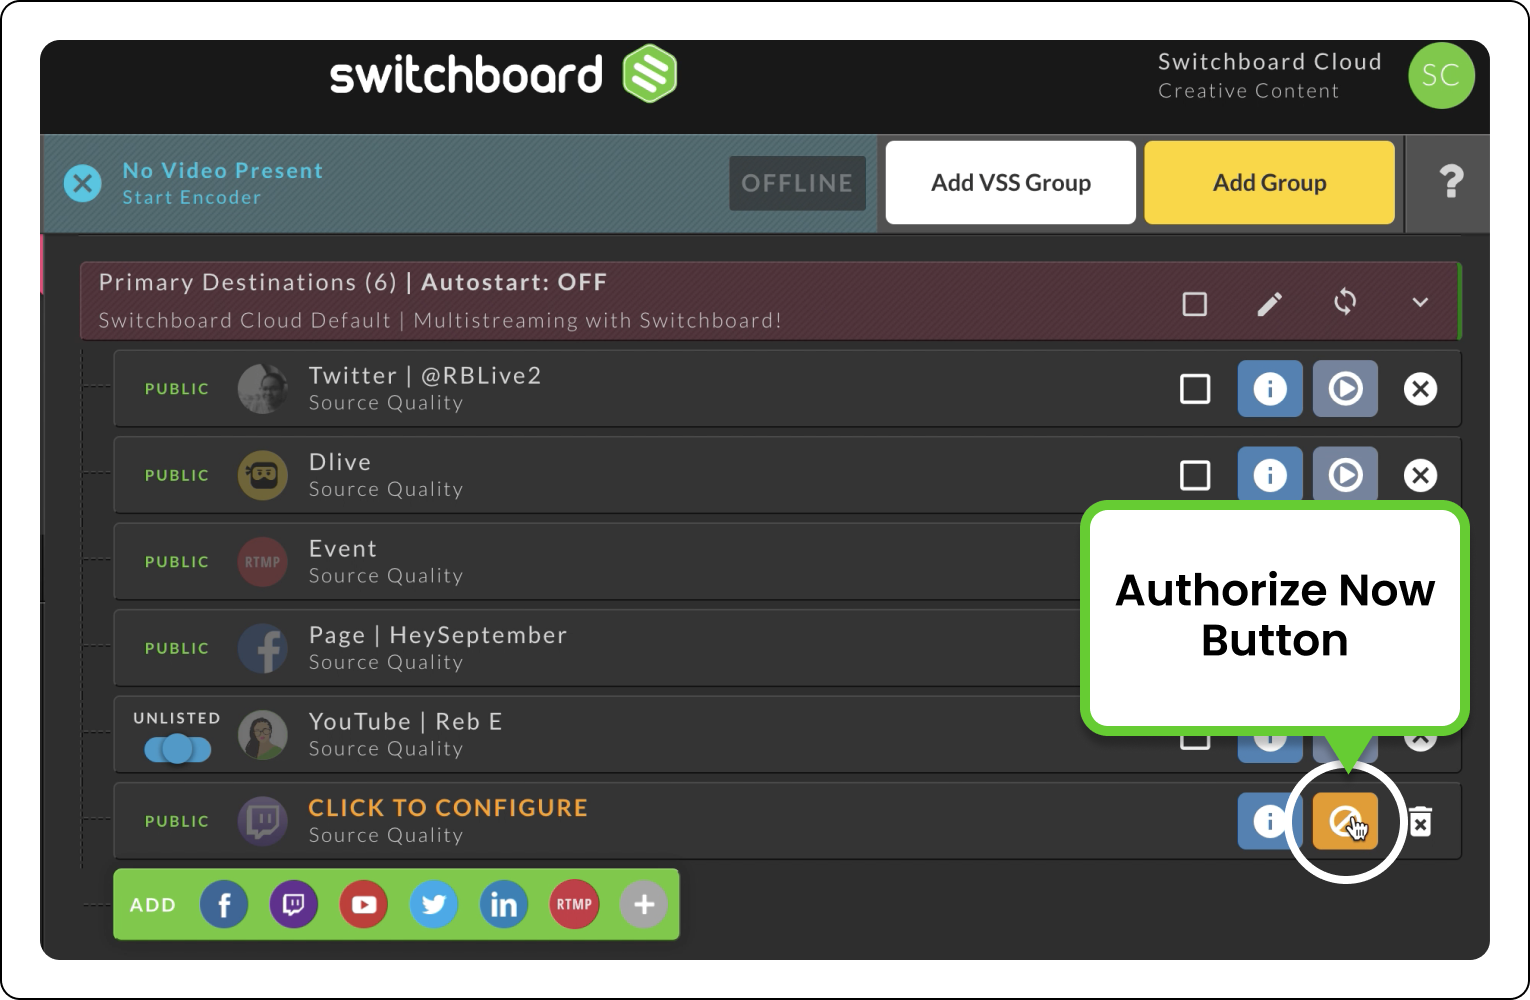 switchboard_cloud-check_authorization_authorize_now_button.png